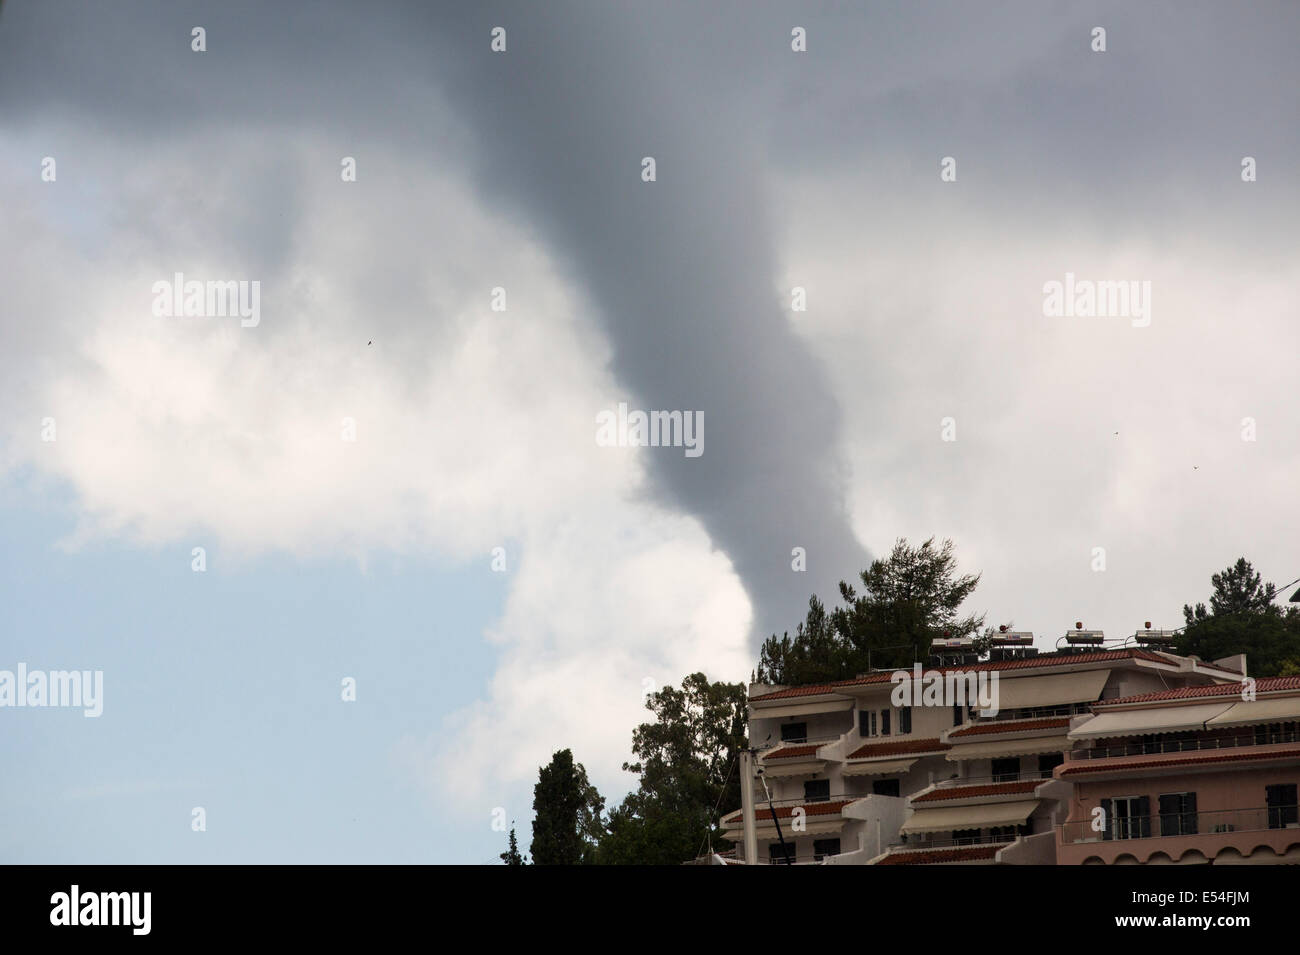 A tornado water spout casued by a severe thunder storm over Sivota, Greece, Stock Photo